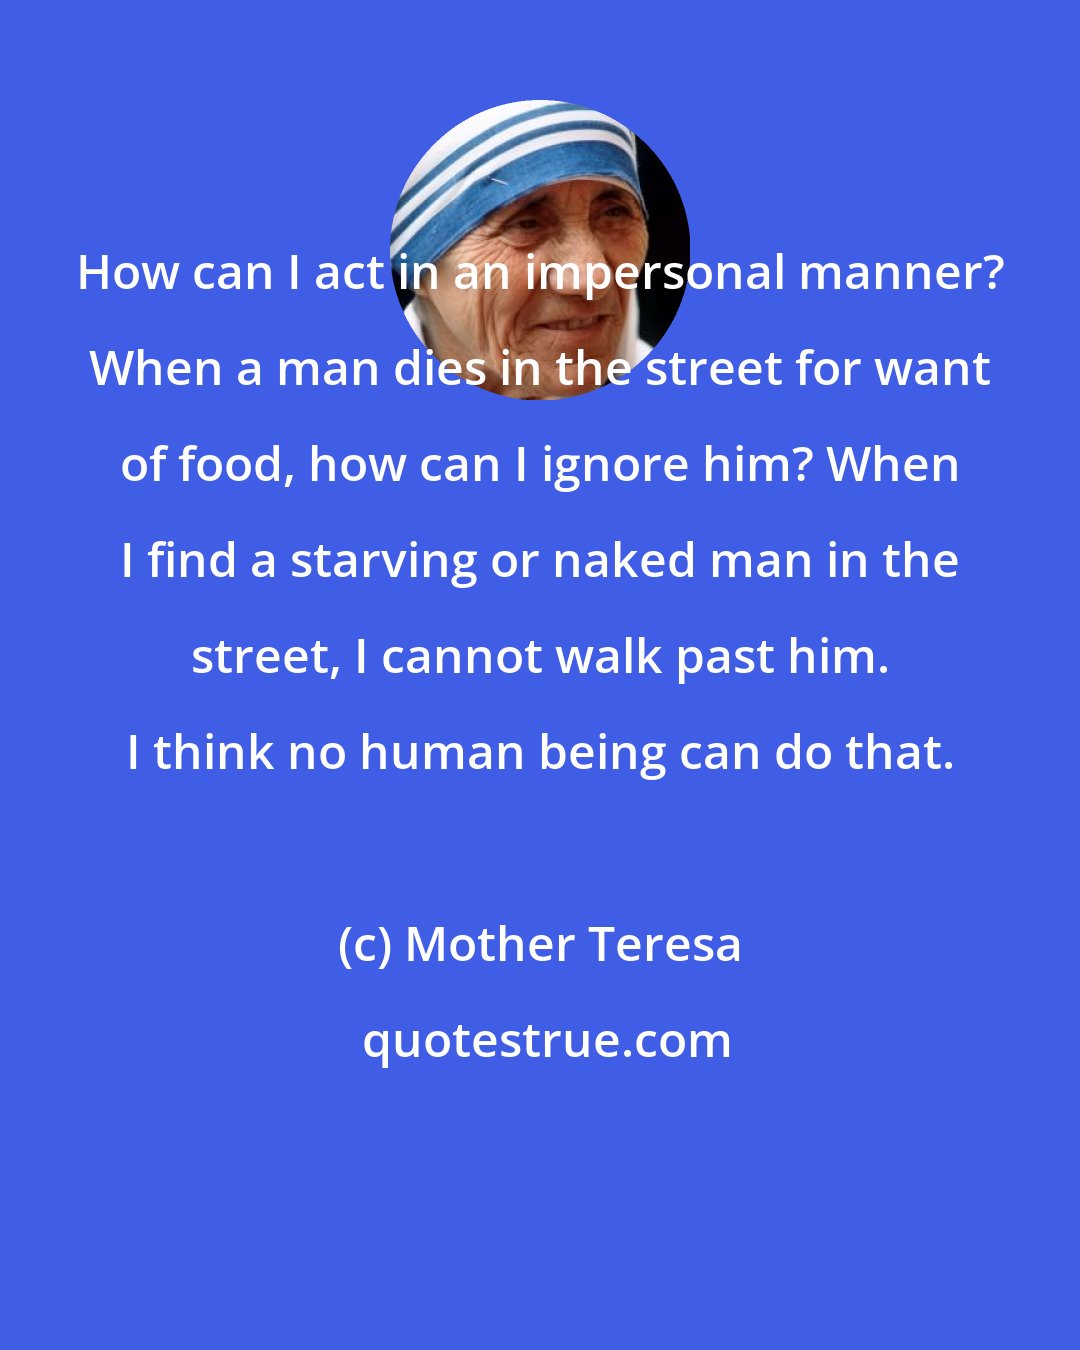 Mother Teresa: How can I act in an impersonal manner? When a man dies in the street for want of food, how can I ignore him? When I find a starving or naked man in the street, I cannot walk past him. I think no human being can do that.